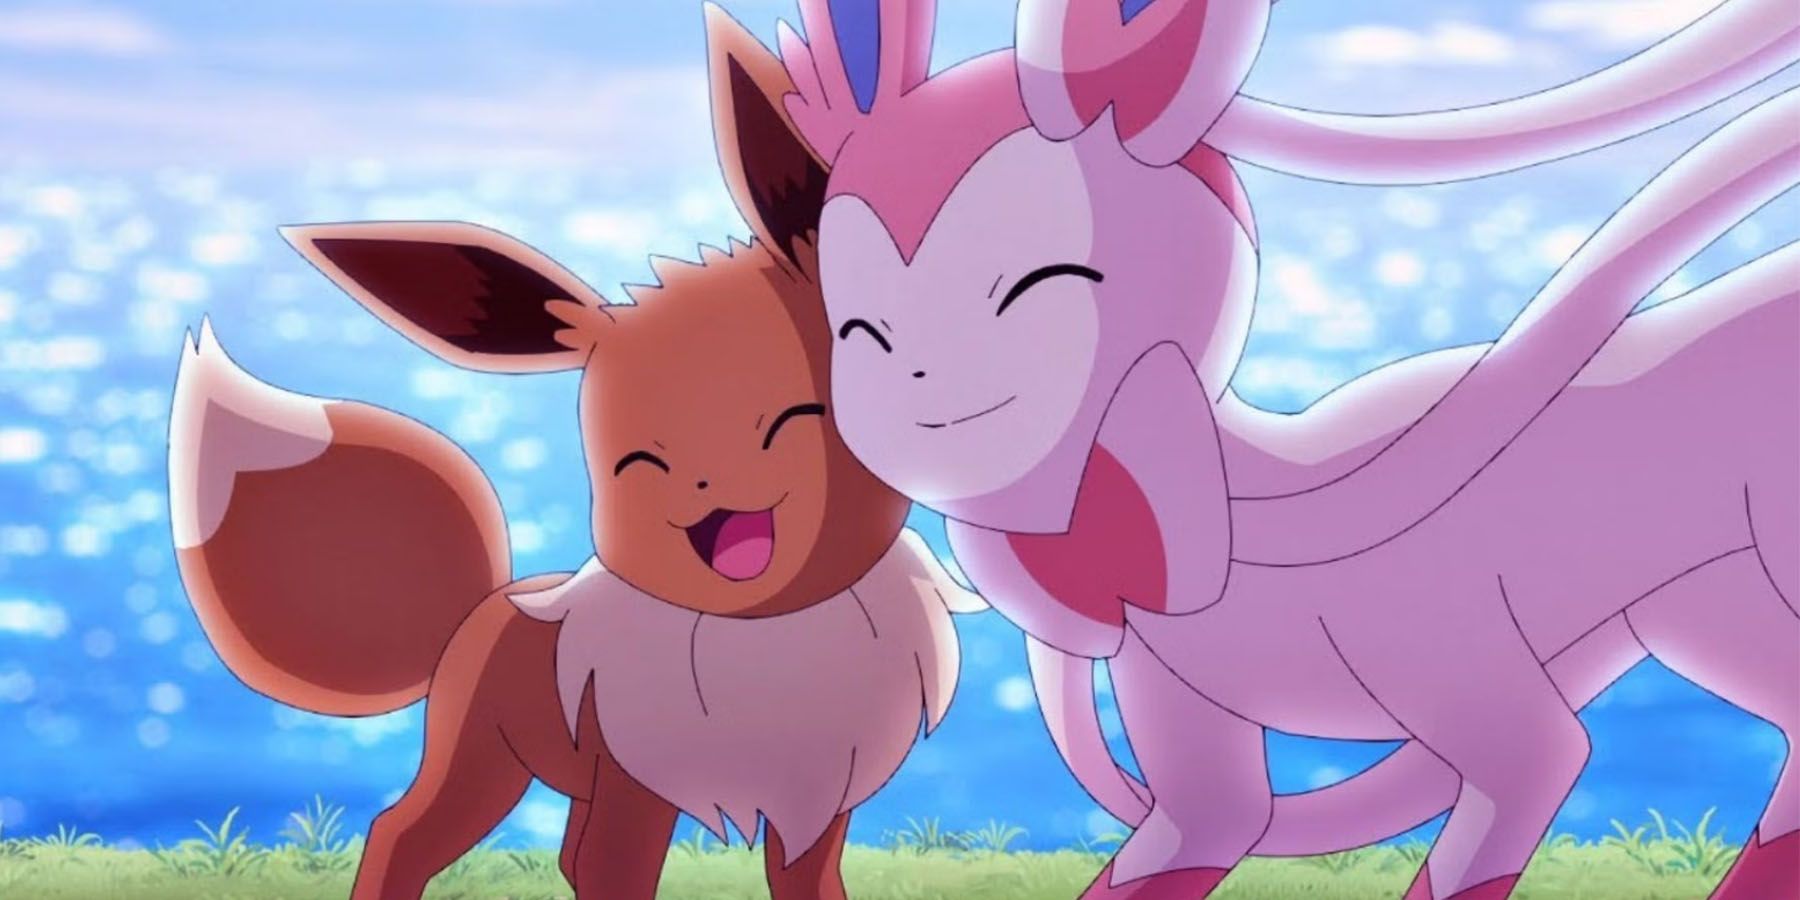 A screenshot of Eevee and Sylveon in the Pokemon anime.